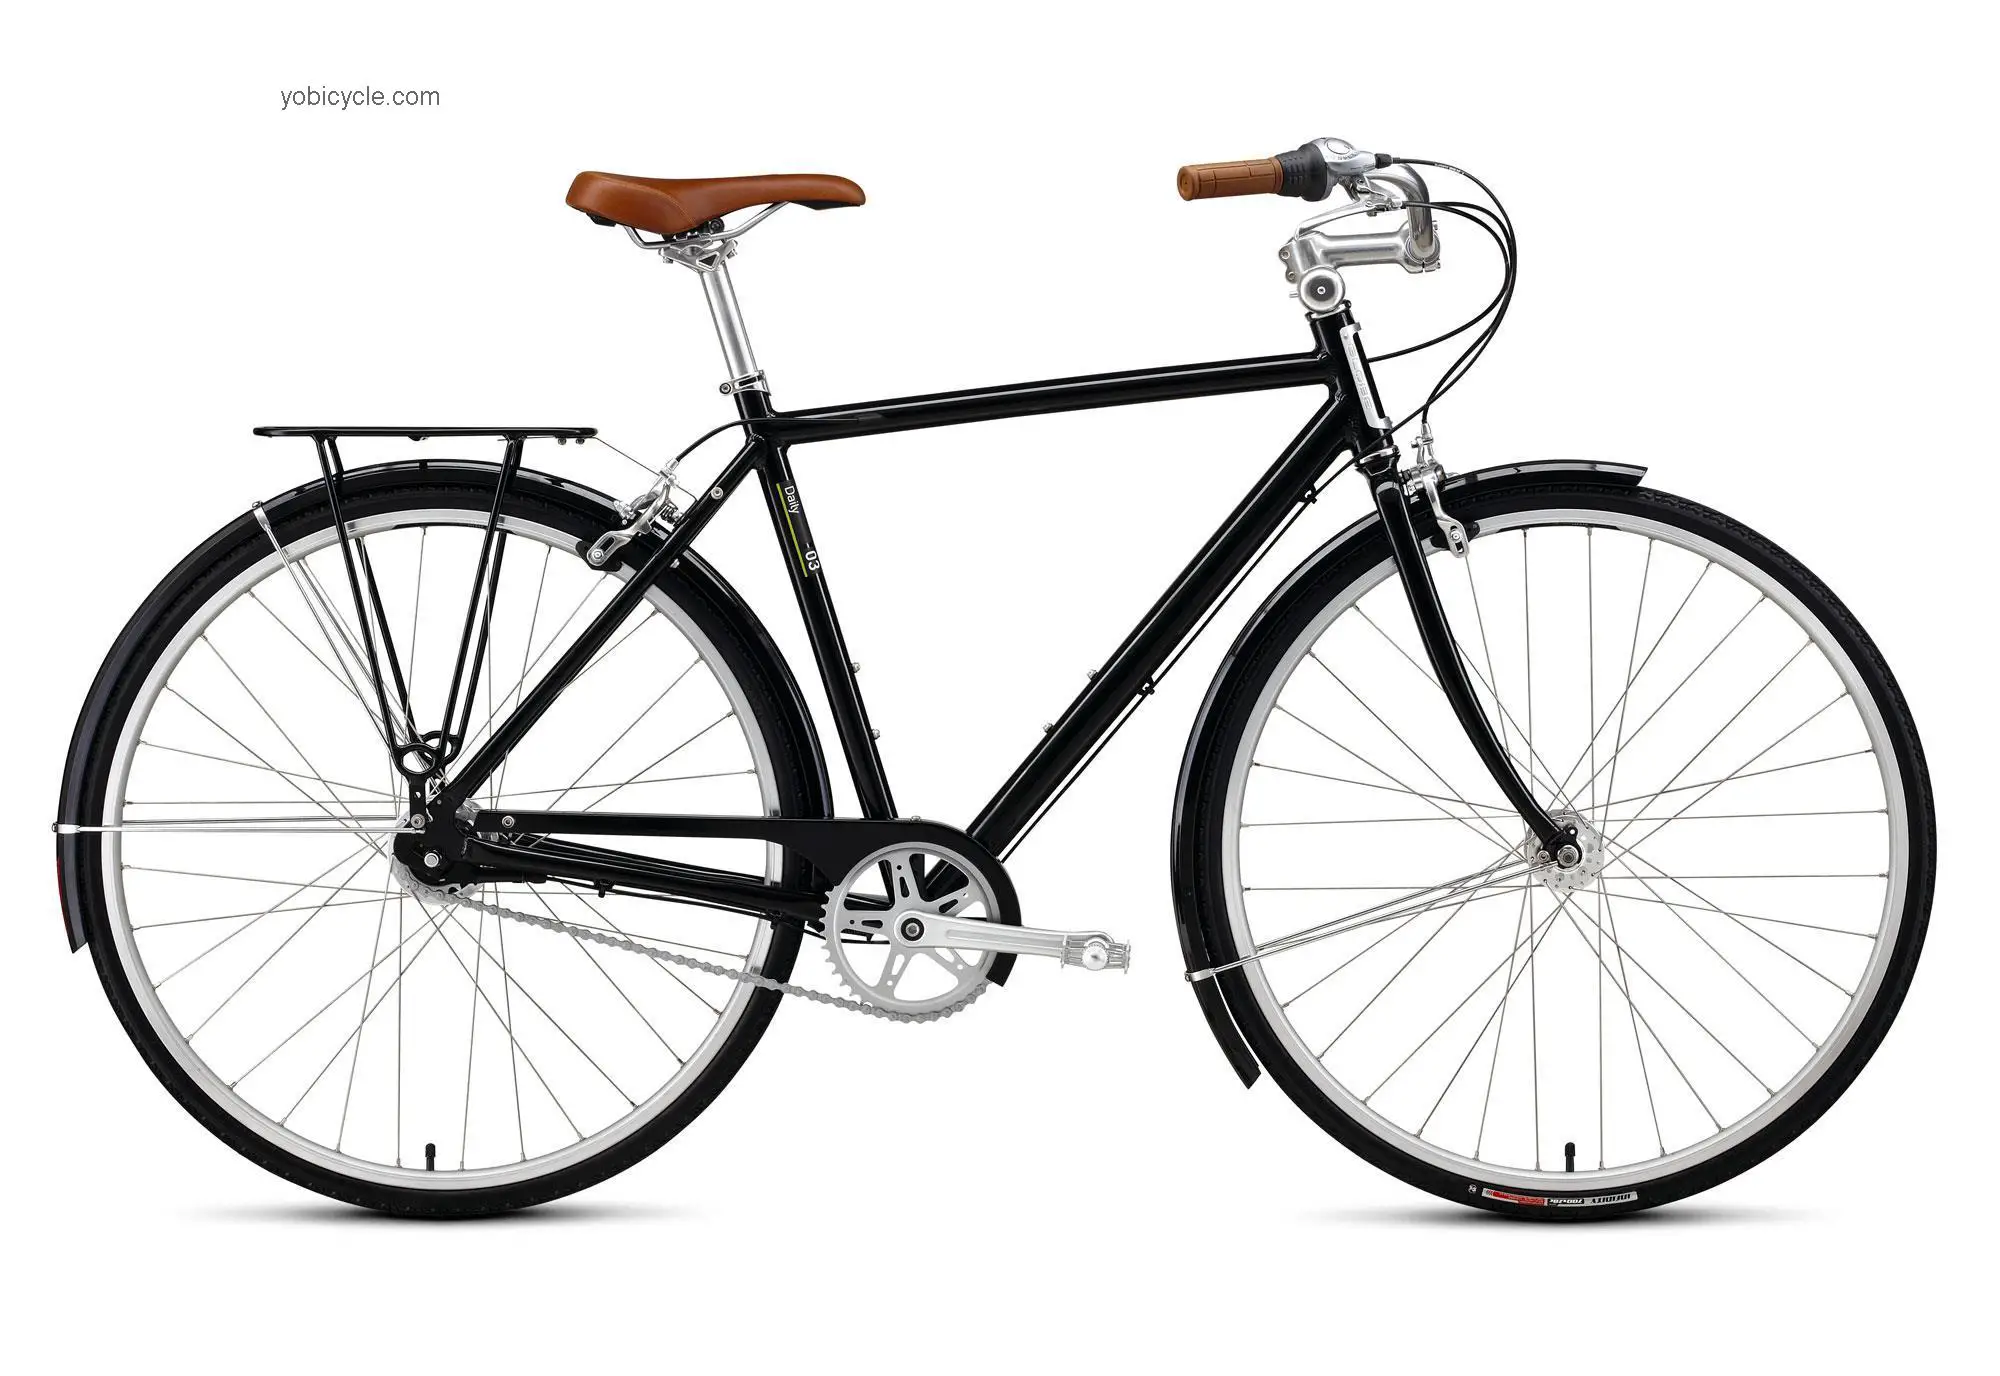 Specialized Daily 3 2012 comparison online with competitors